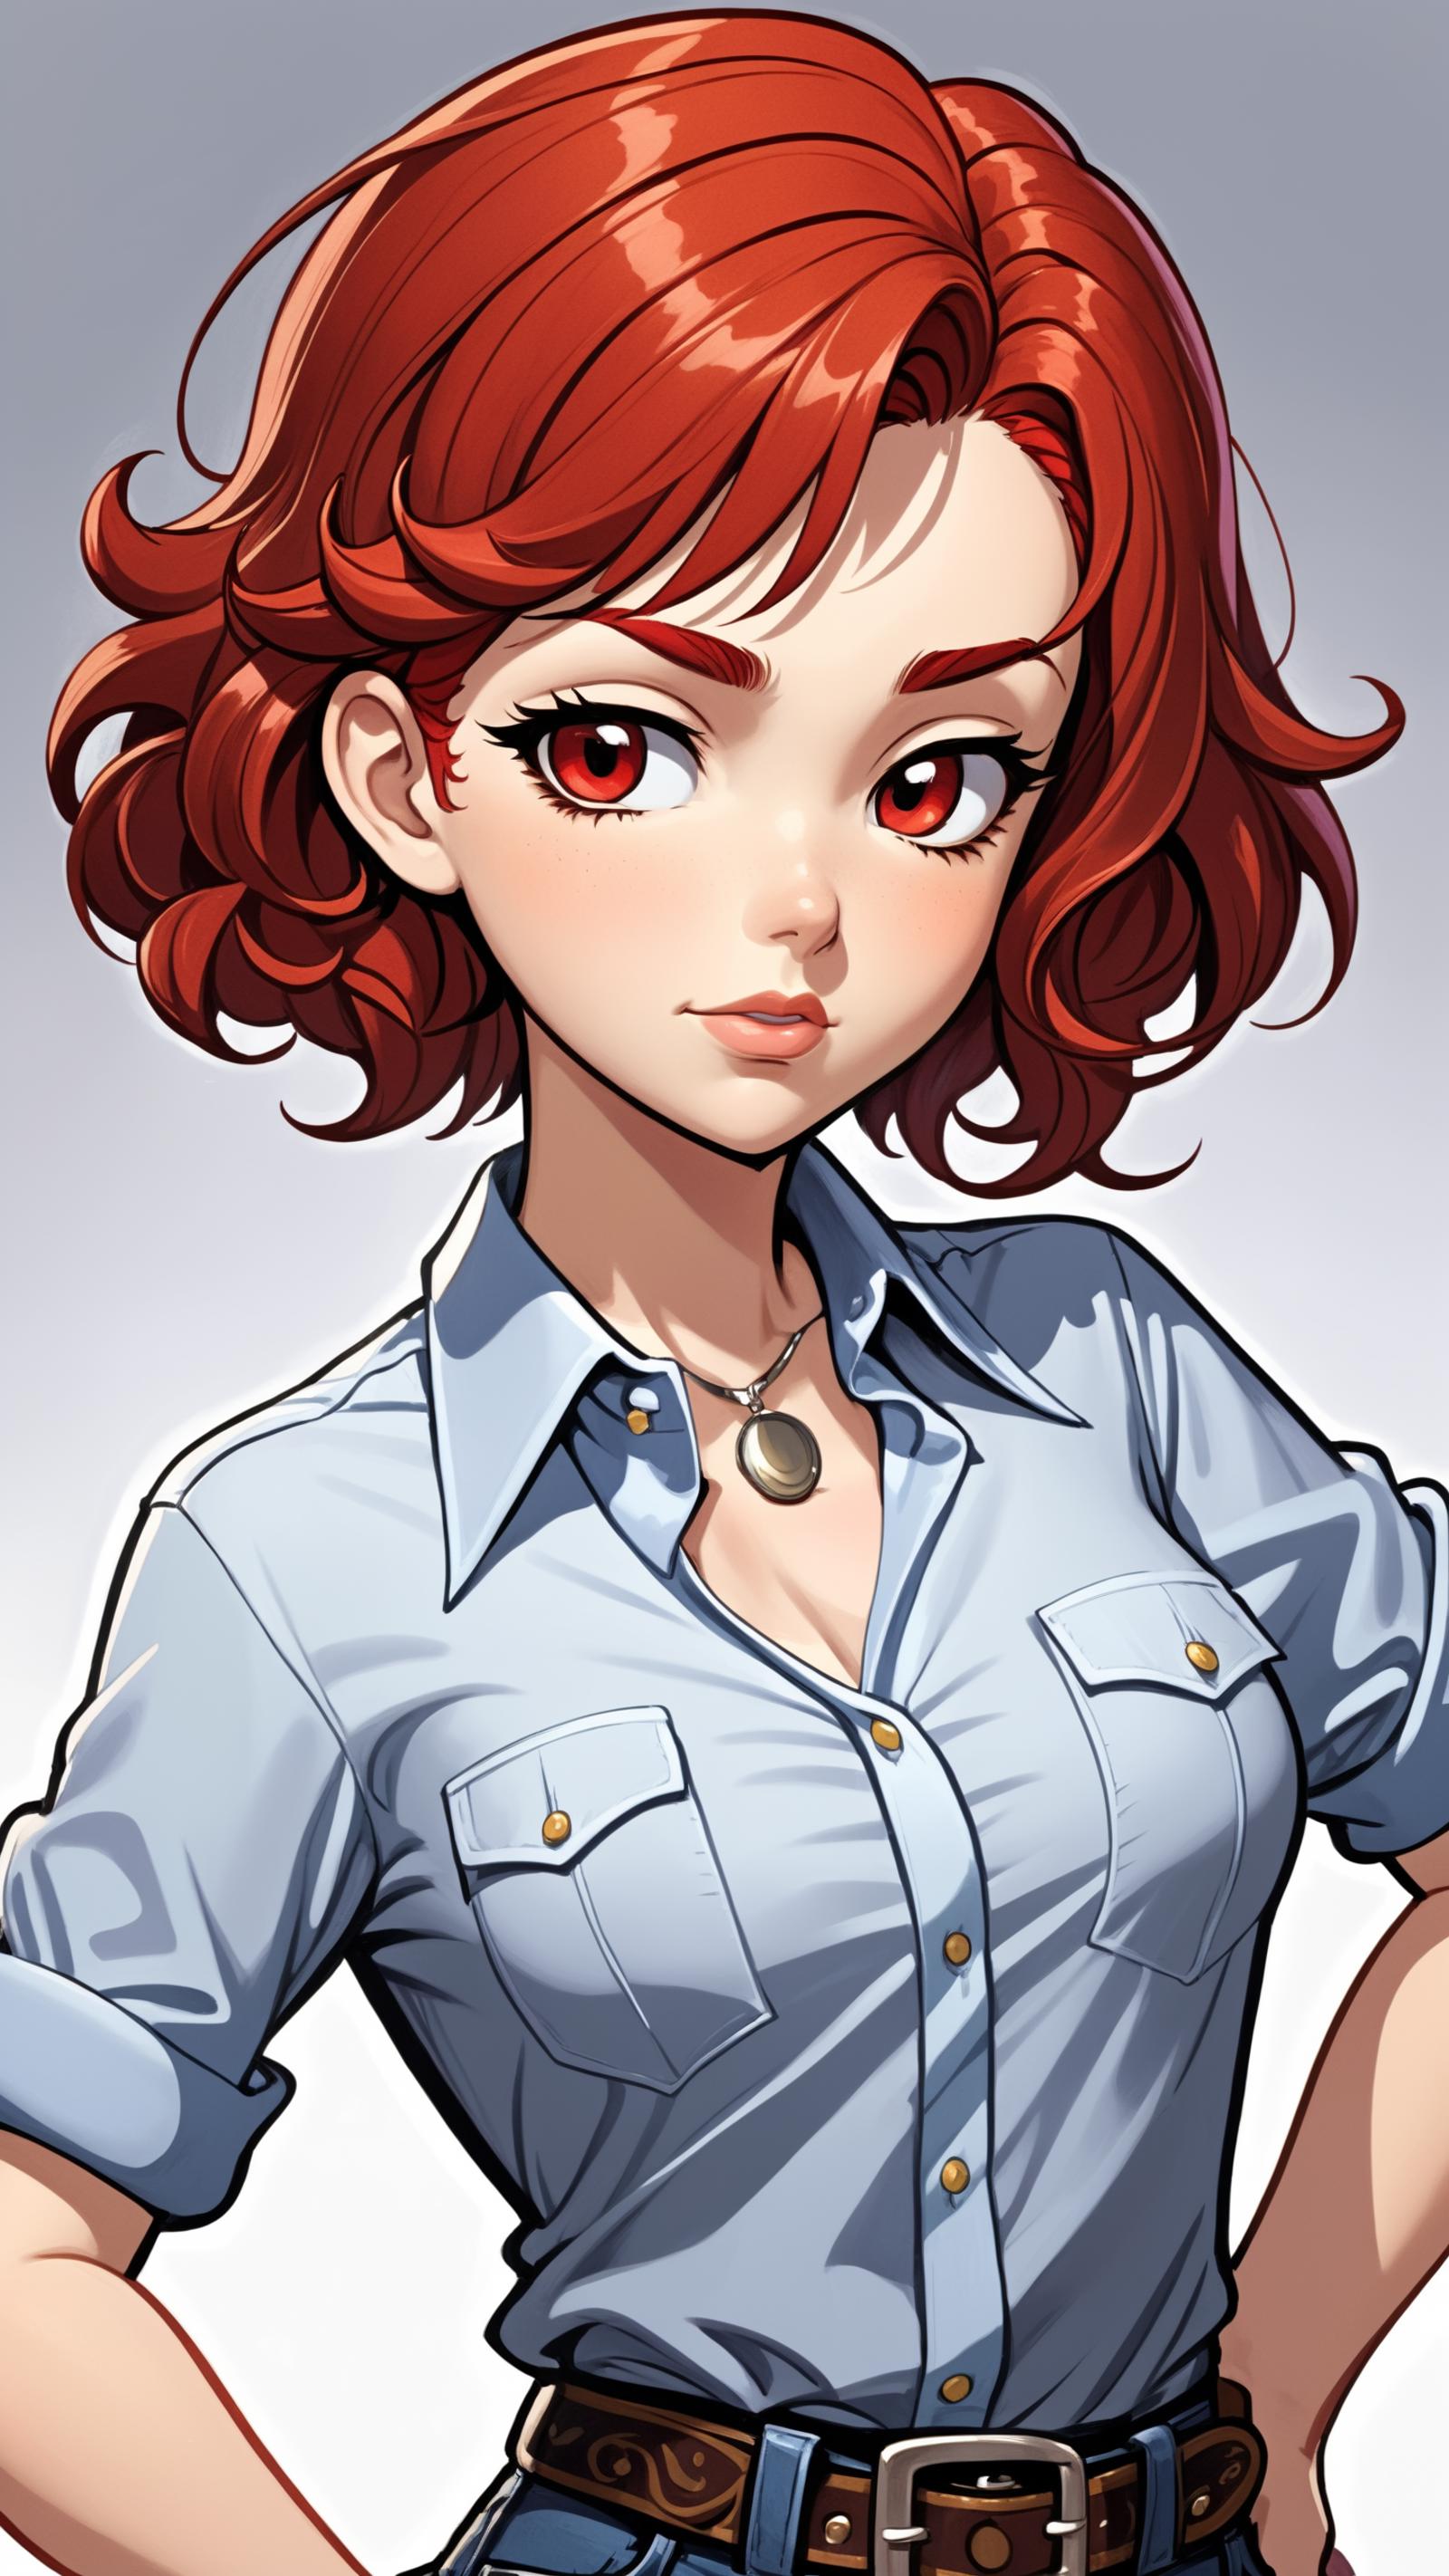 A cartoon illustration of a woman with red hair, wearing a blue shirt and a necklace.